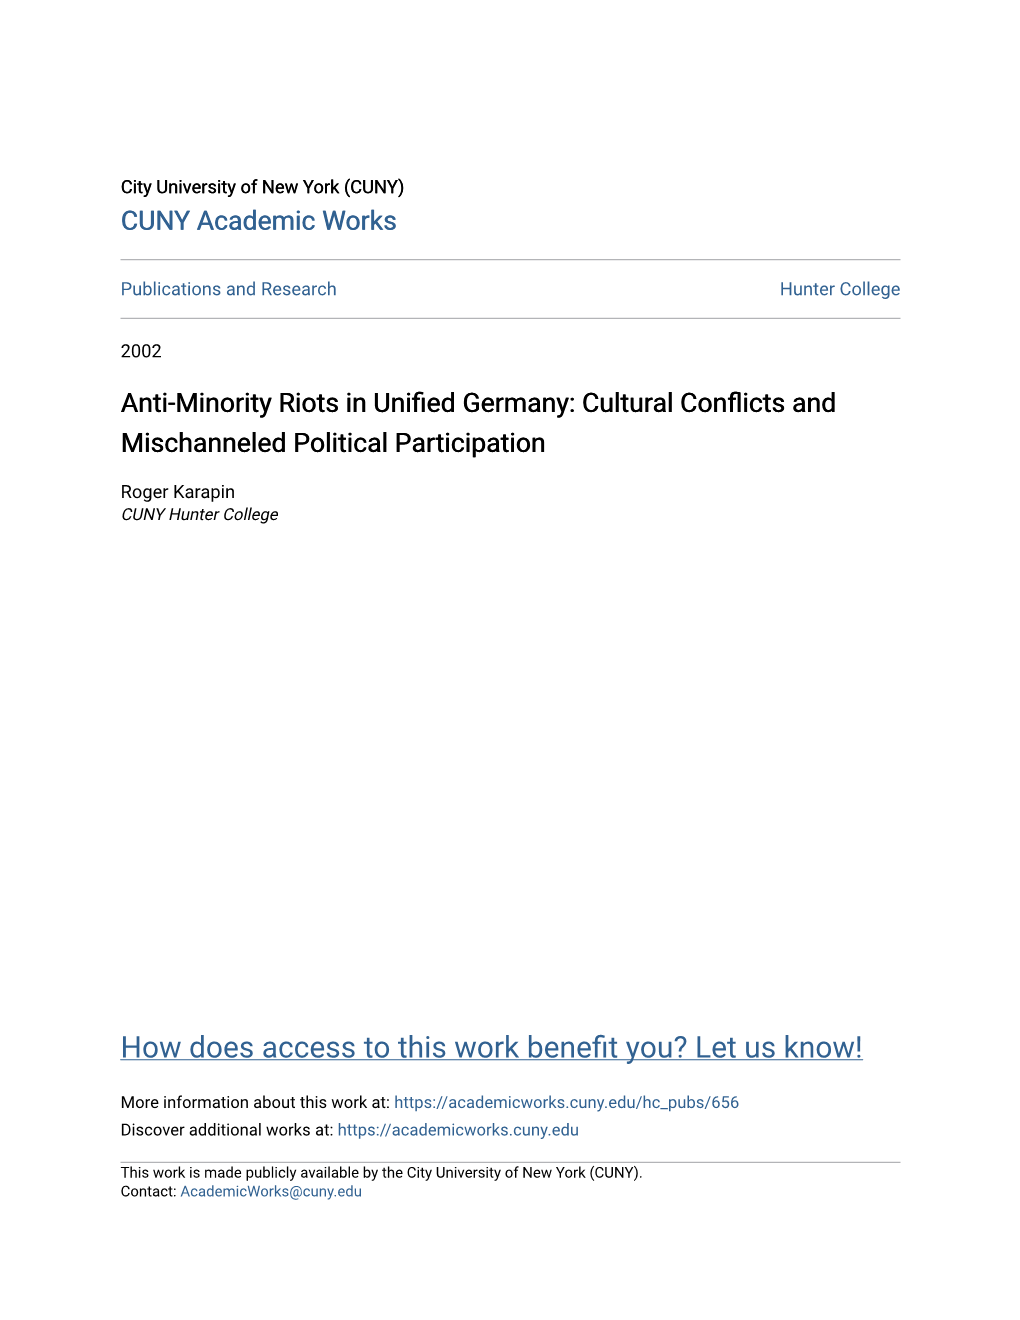 Anti-Minority Riots in Unified Germany: Cultural Conflicts and Mischanneled Political Participation